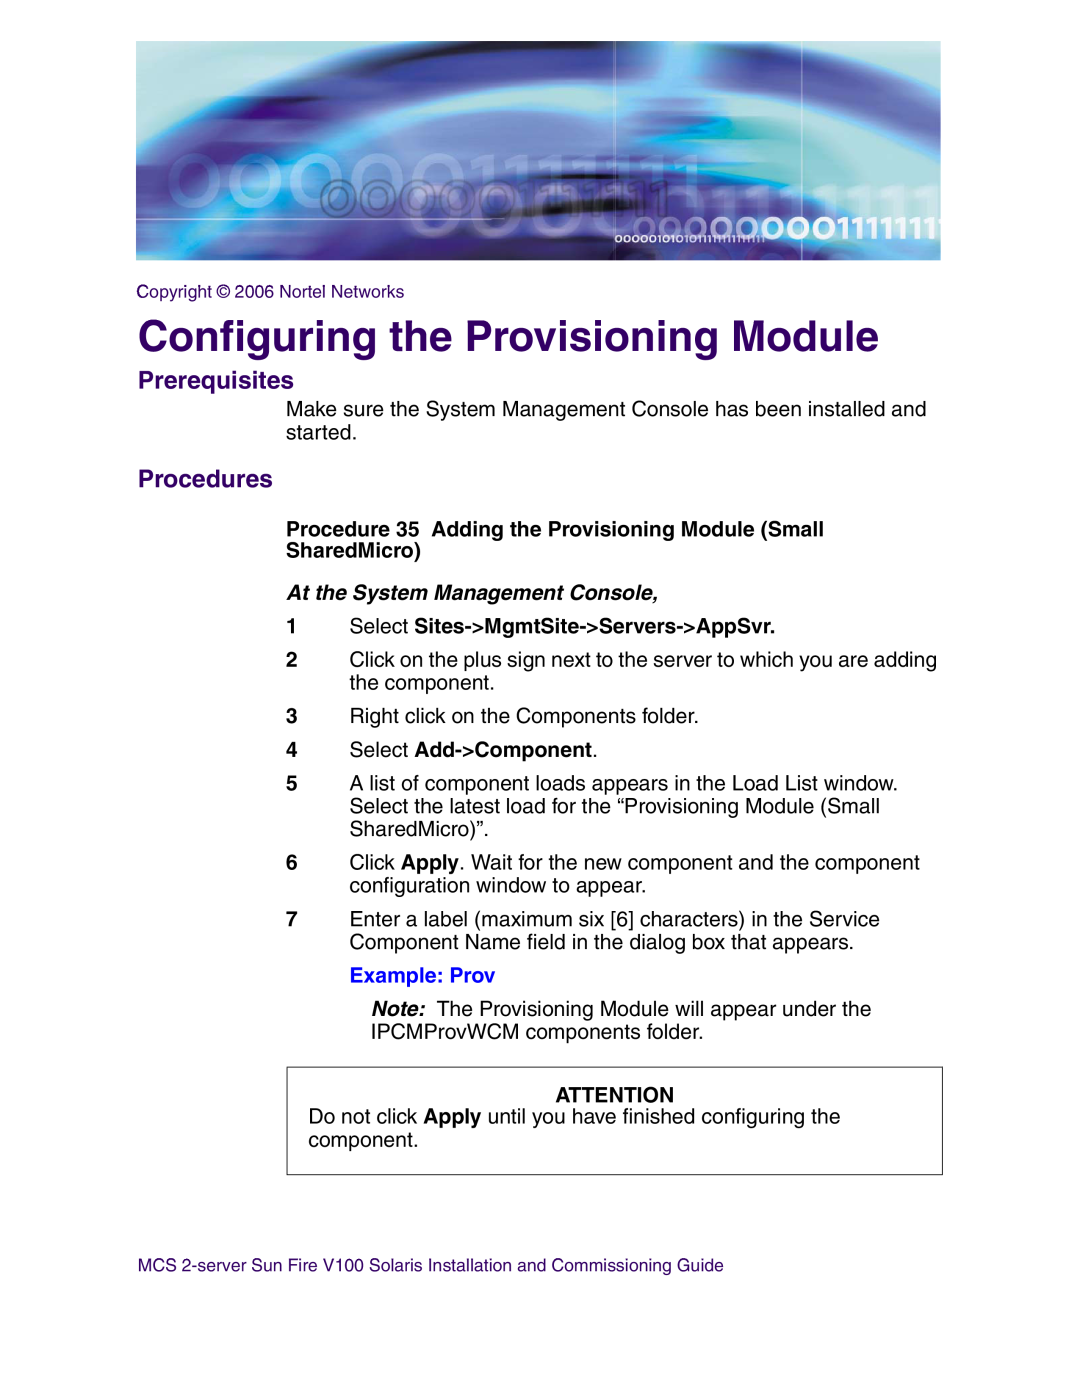 Nortel Networks V100 Configuring the Provisioning Module, Procedure 35 Adding the Provisioning Module Small SharedMicro 